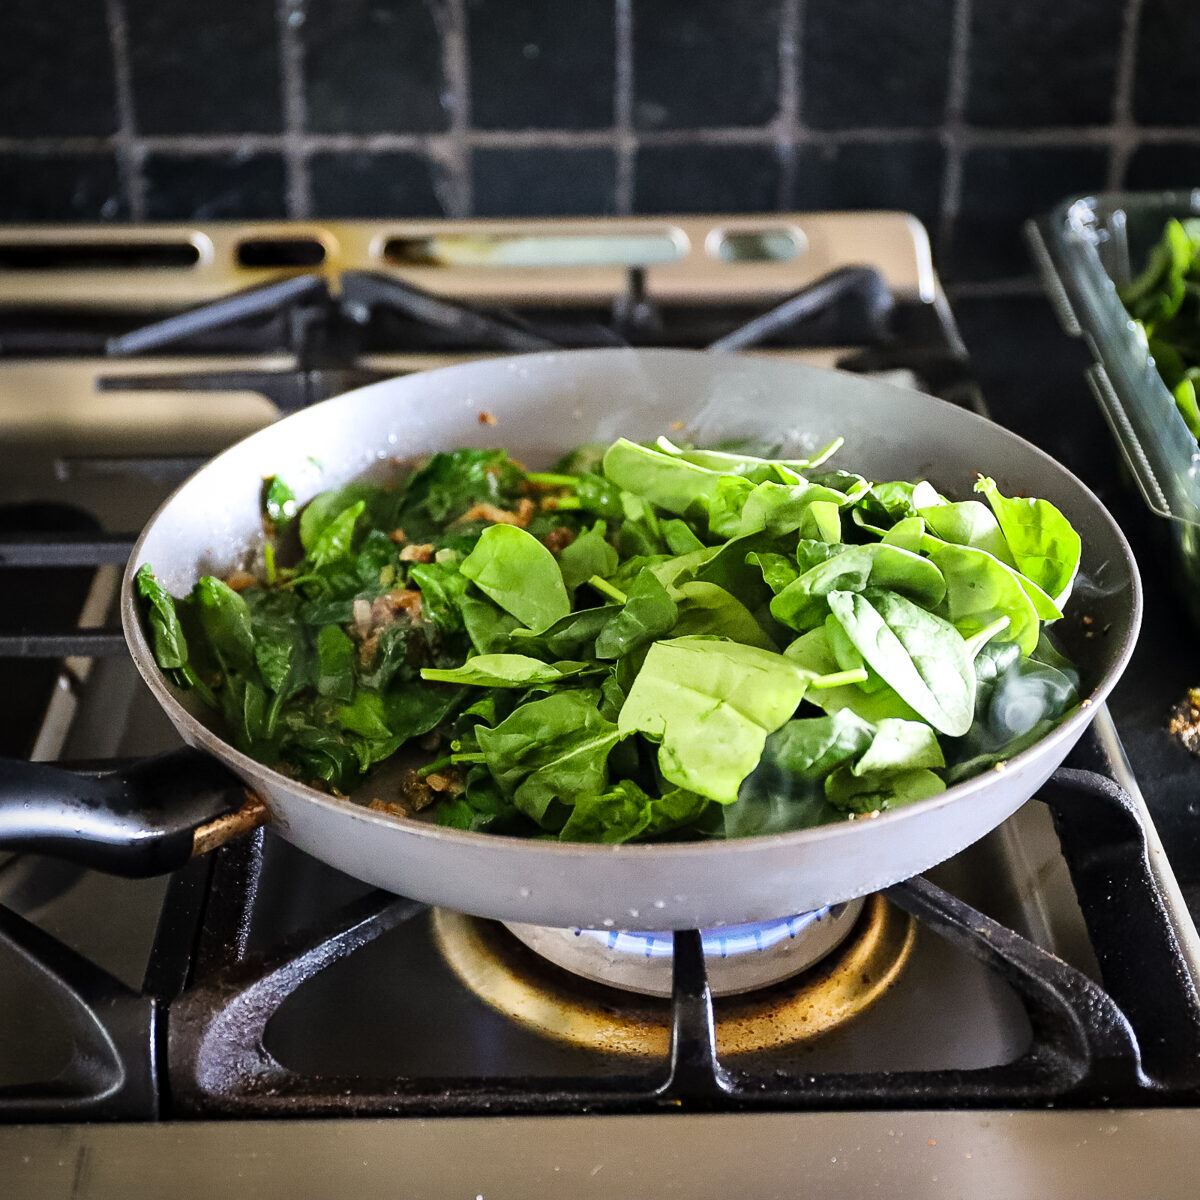 Second addition of spinach (aka palak) added to pan of cooked spinach.